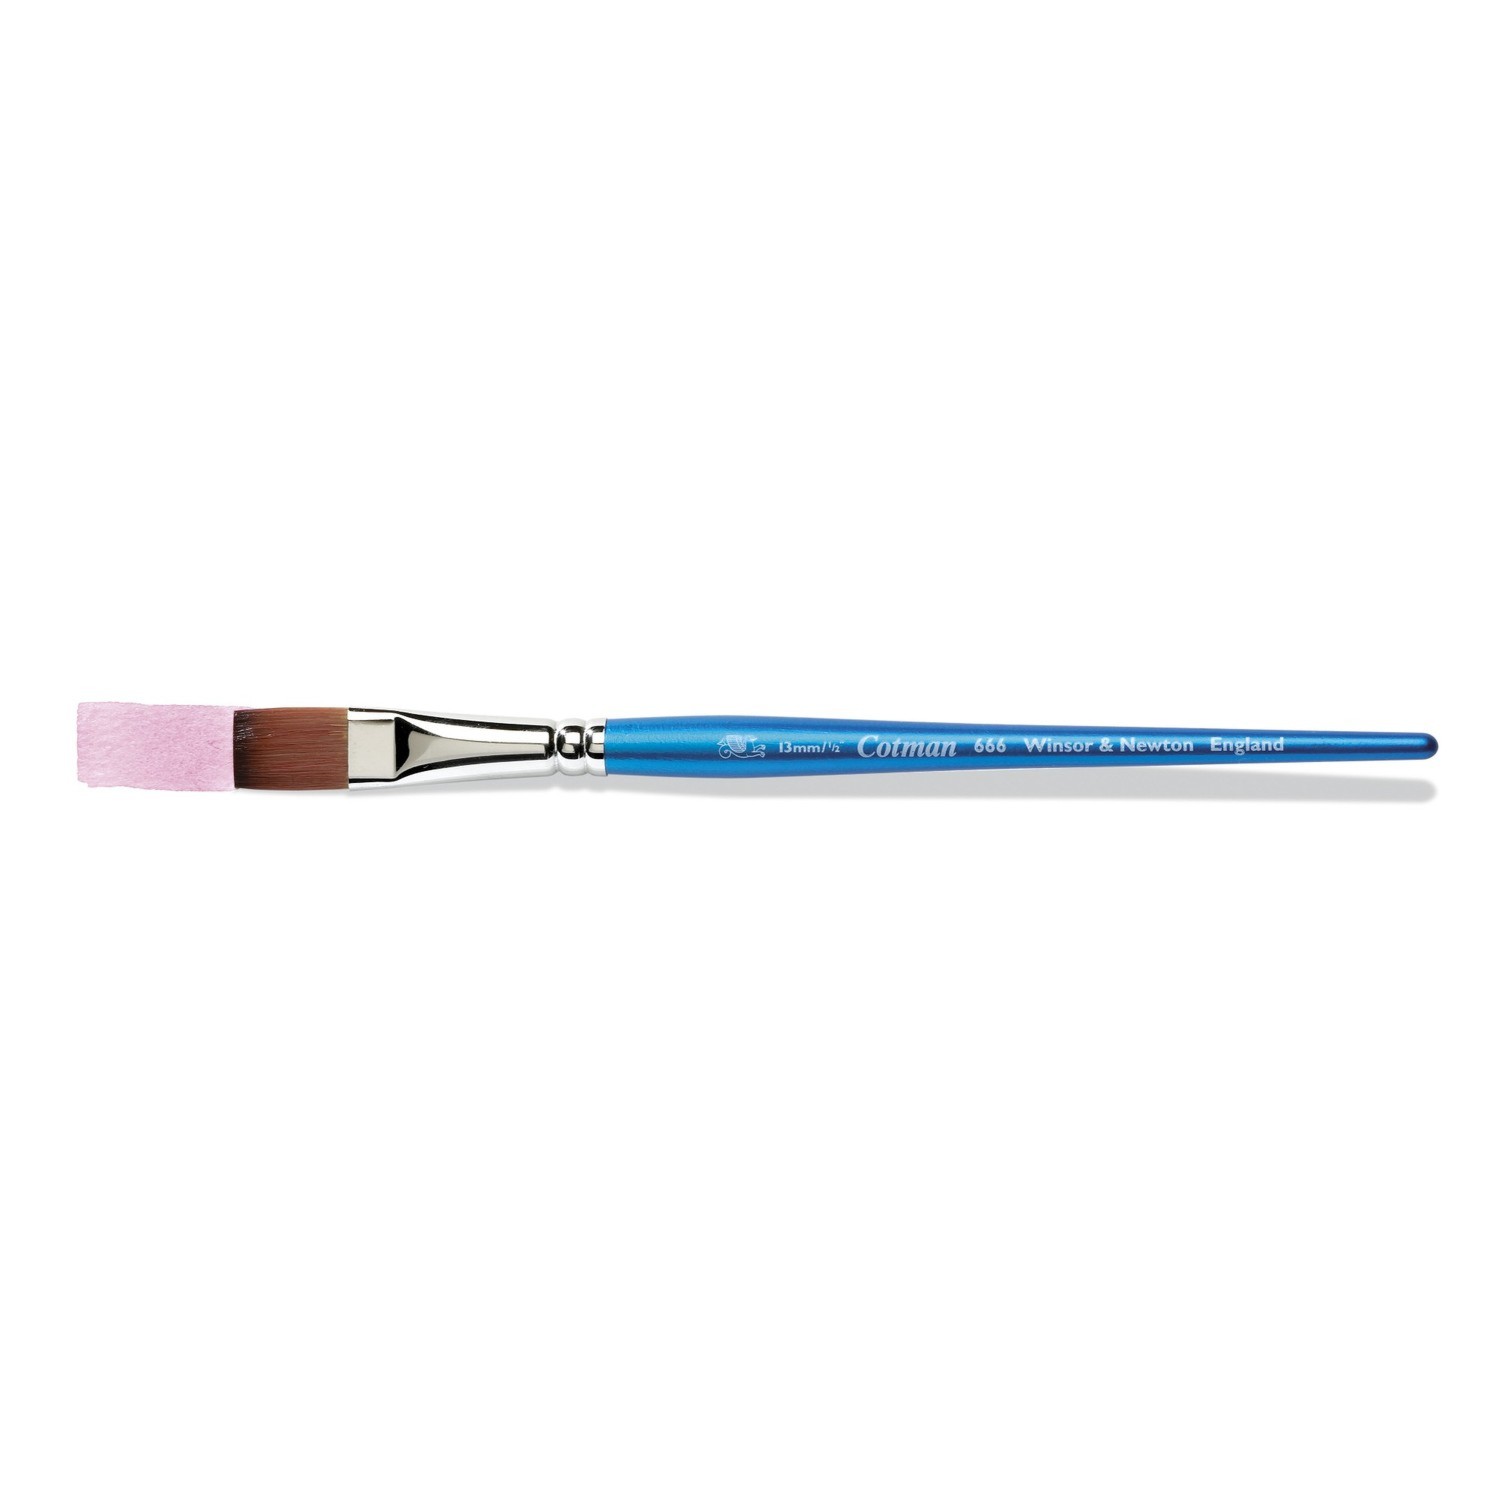 Winsor and Newton Series 666 Cotman One Stroke Watercolour Brushes - 1/2 in (13 mm) Image 3